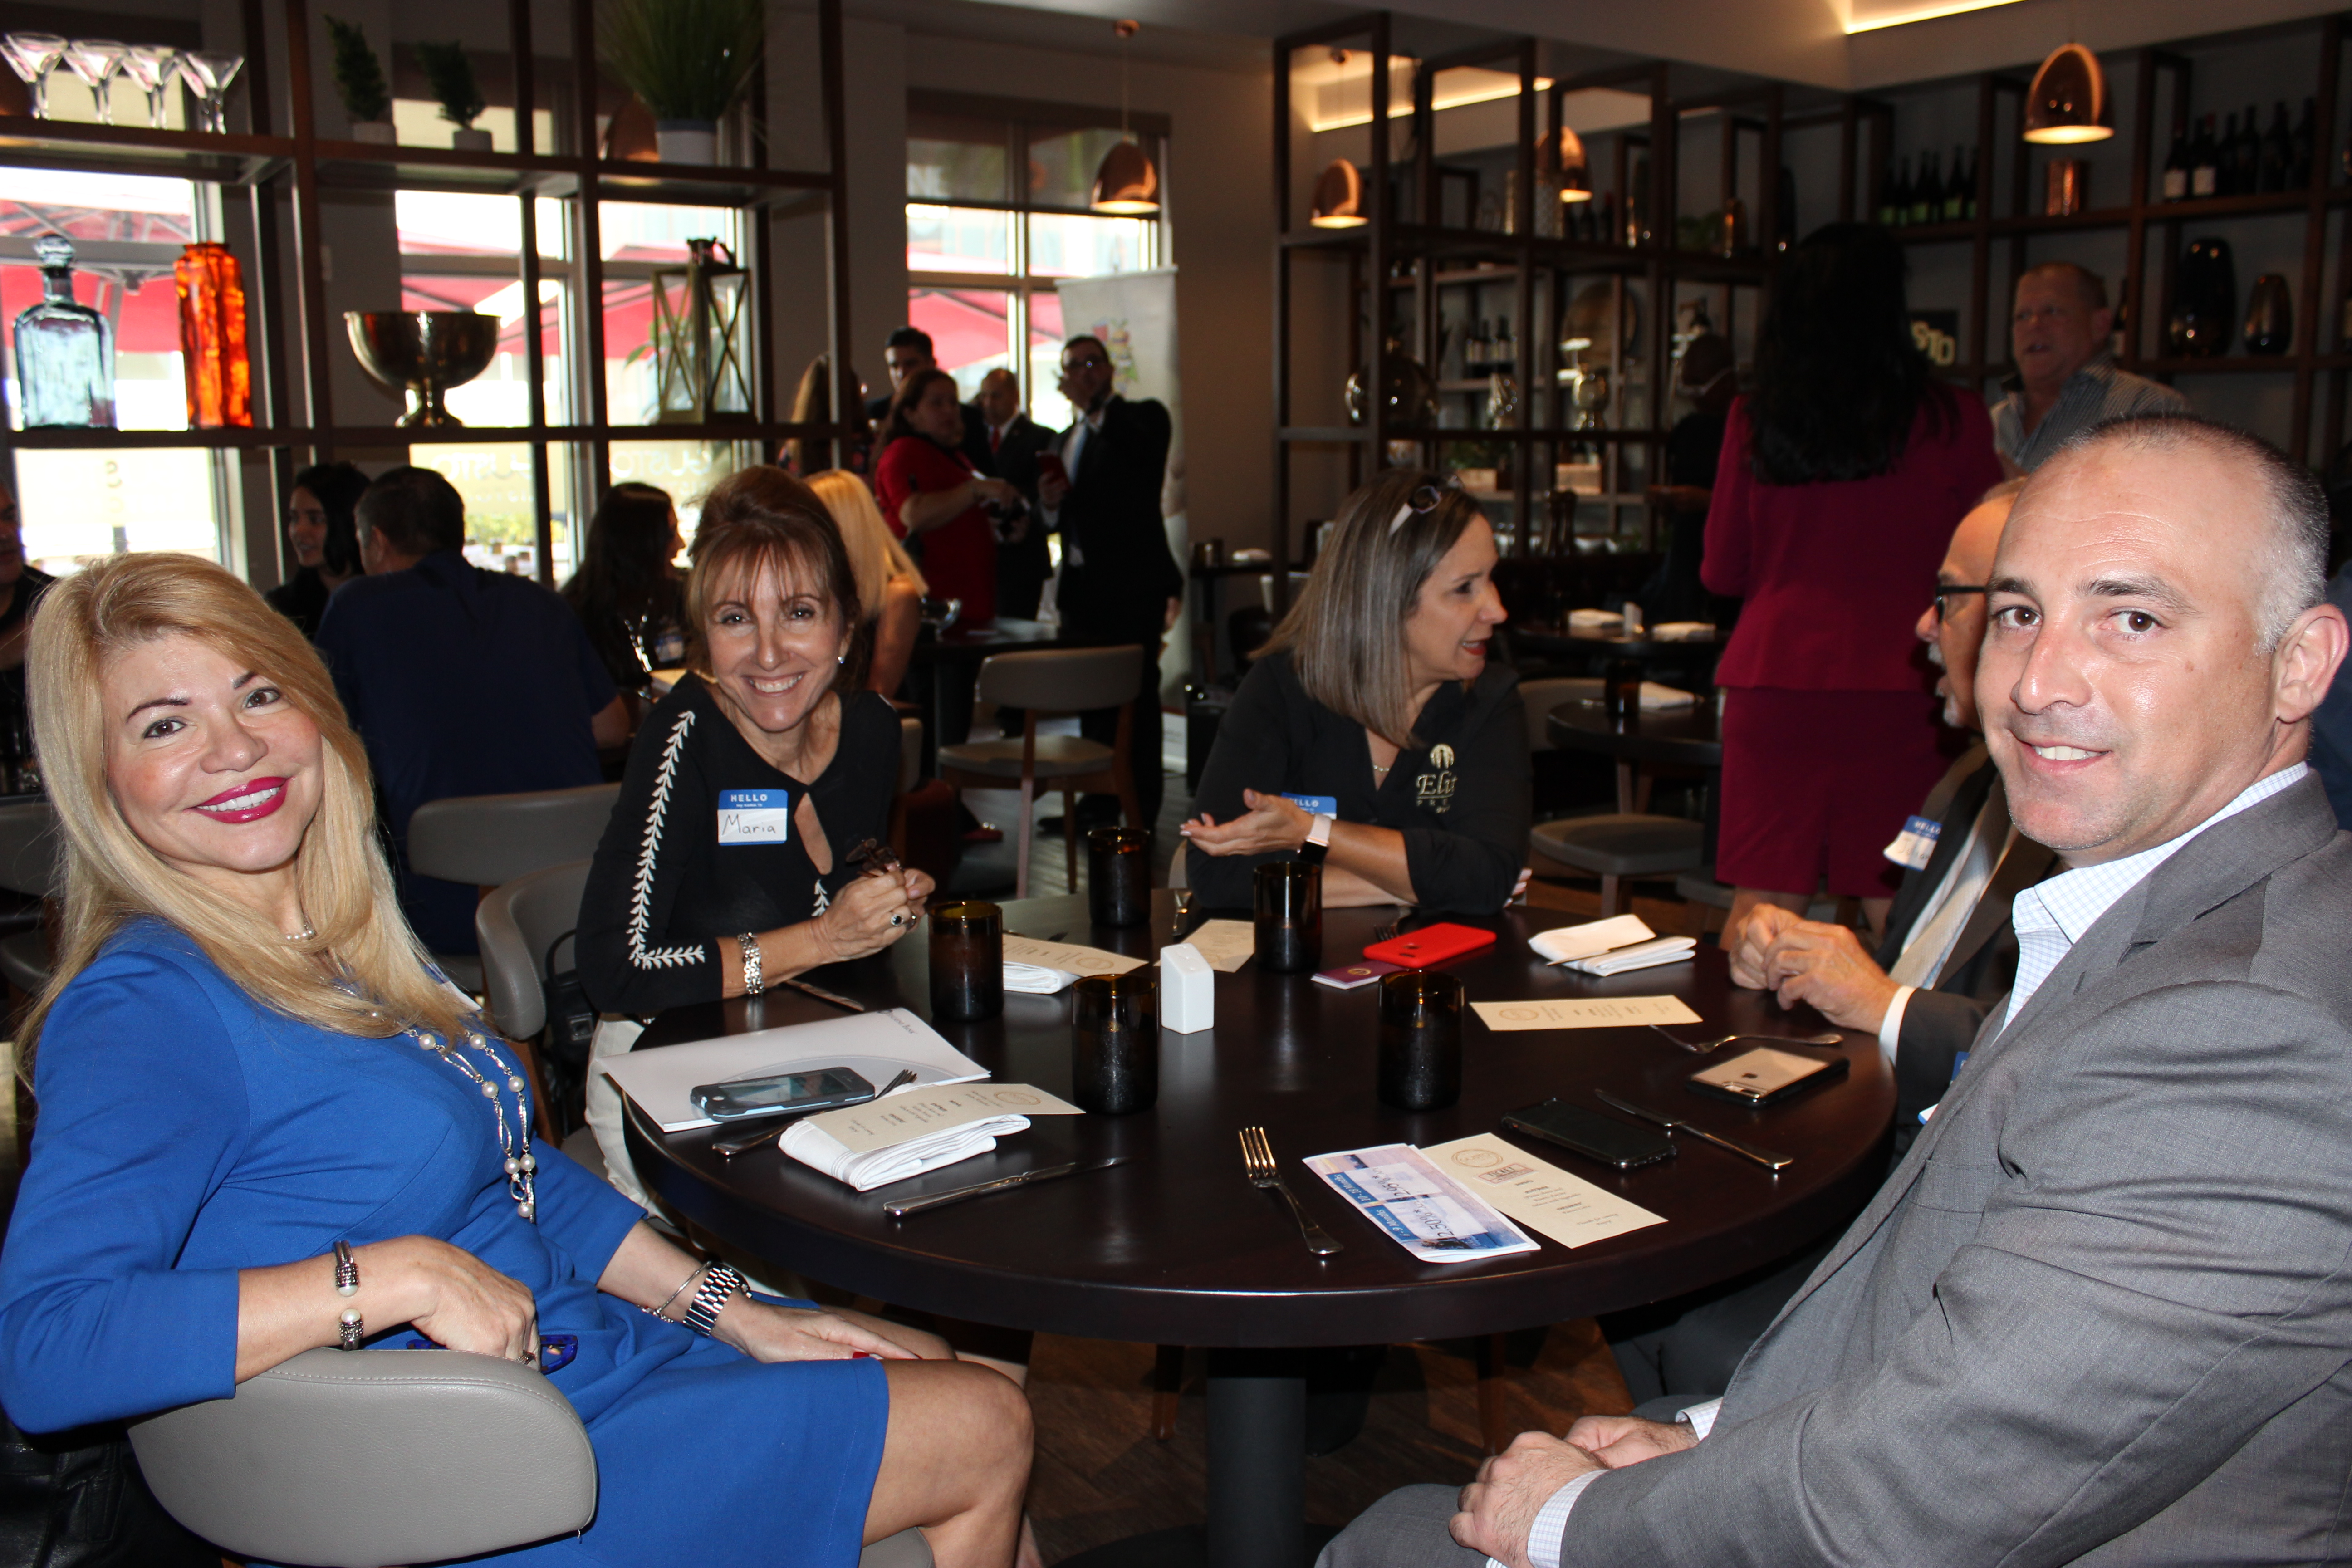 Doral Chamber of Commerce introduces a full table of guests in Gusto Ristobar luncheon.